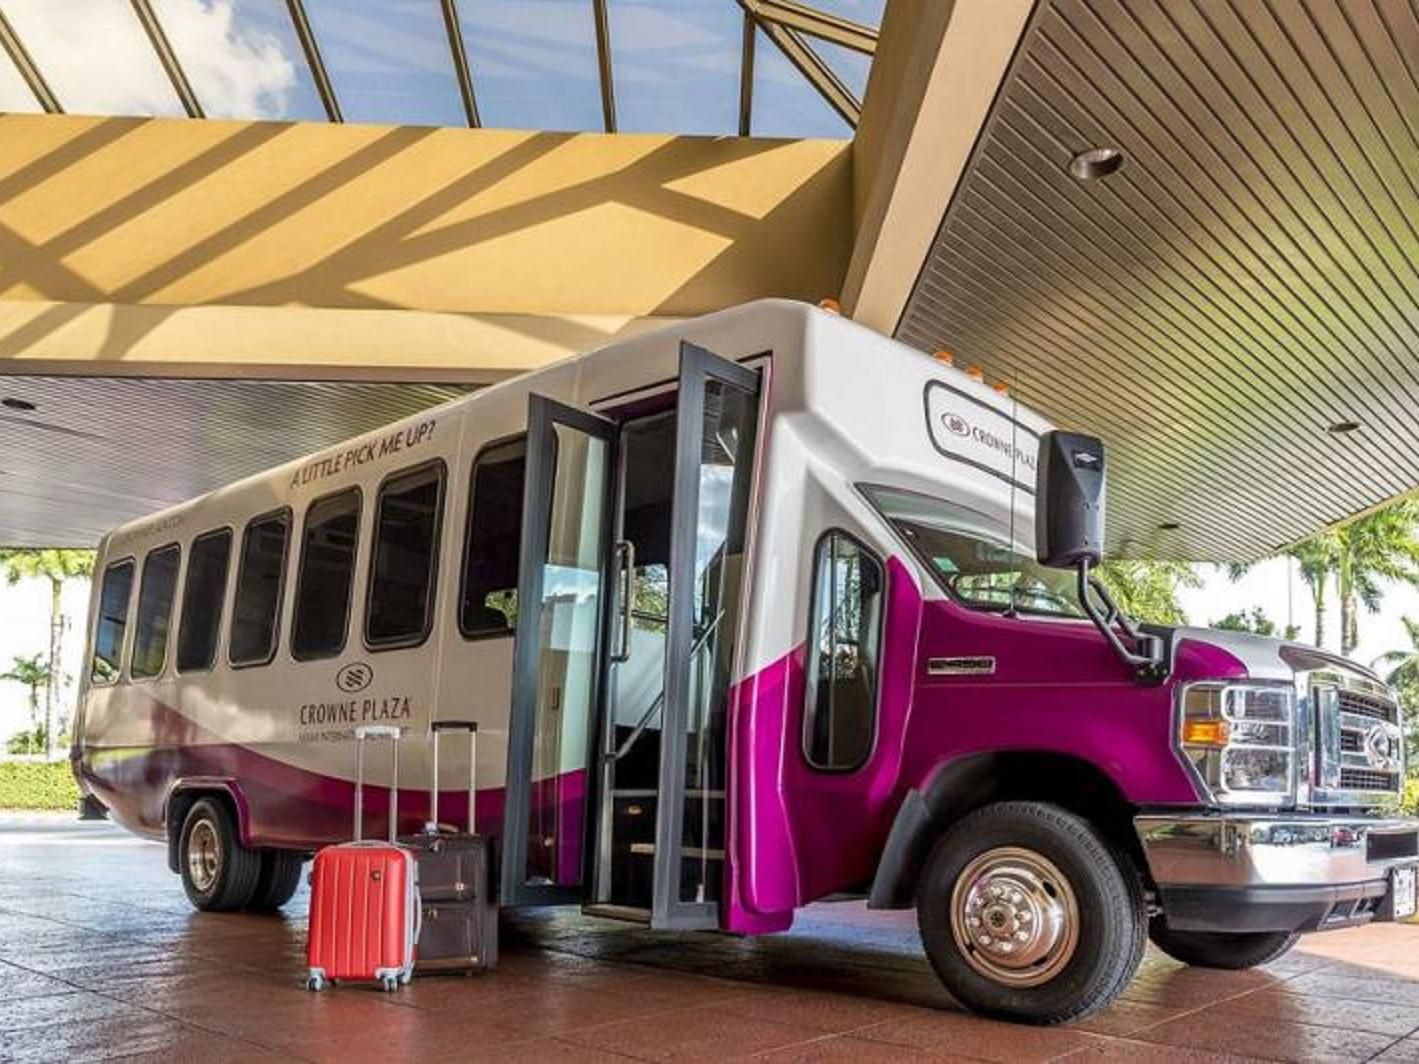 Our Crowne Plaza Chicago O'Hare Hotel & Conference Center boasts a prime location near O’Hare airport. To ensure a hassle-free journey, we offer a complimentary airport shuttle service, track our shuttle's location here: https://trackmyshuttle.com/a/5440 